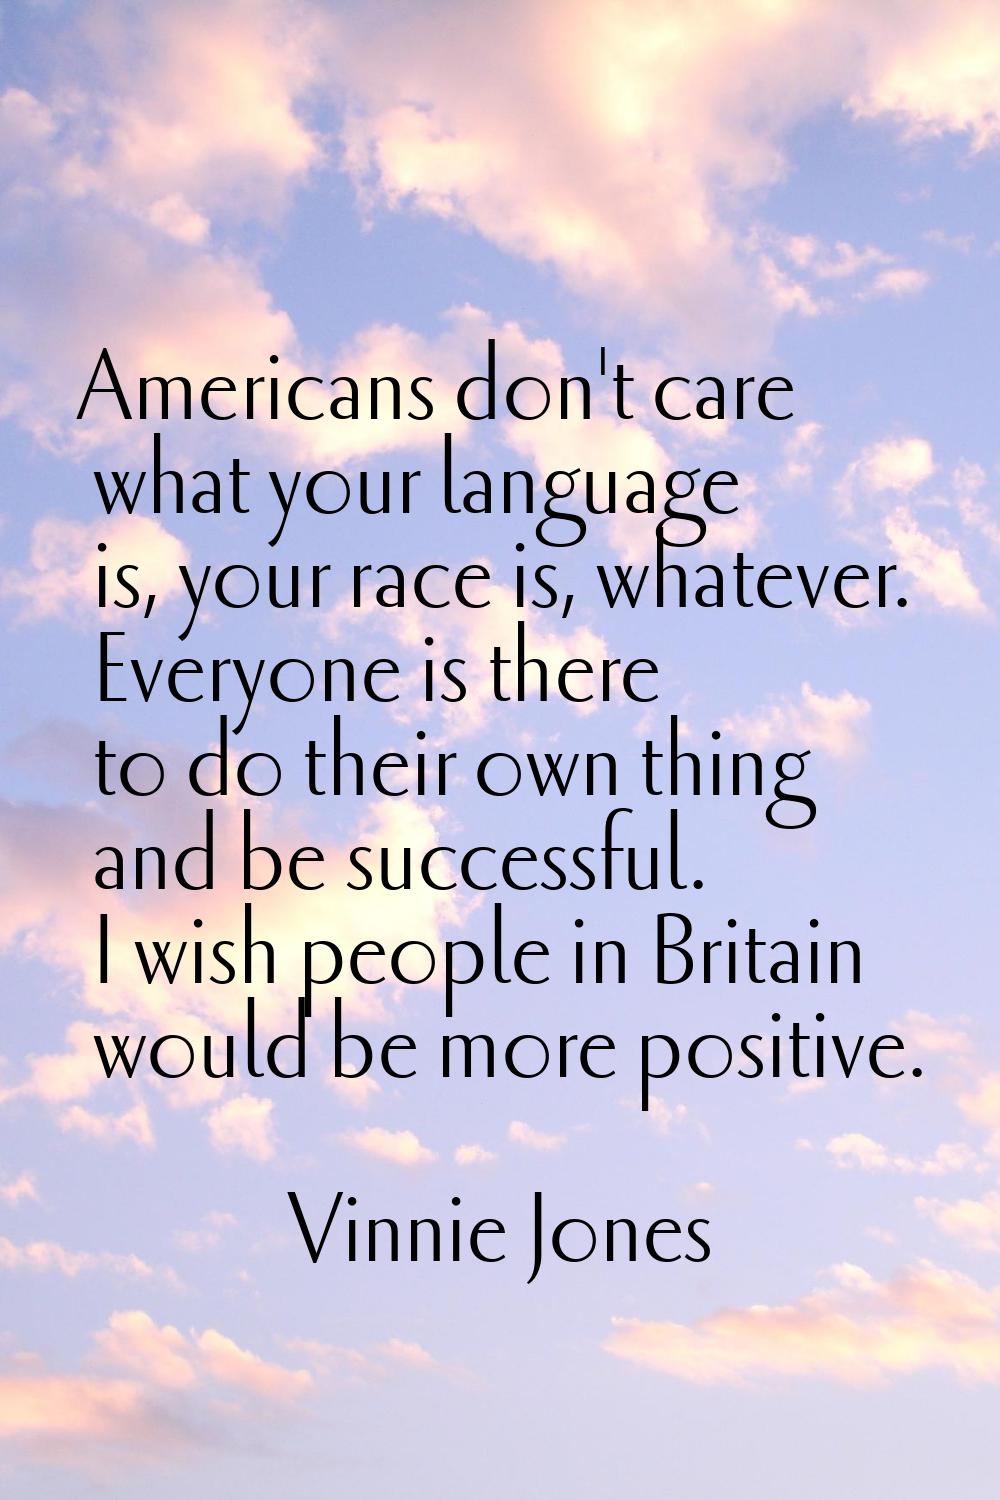 Americans don't care what your language is, your race is, whatever. Everyone is there to do their o